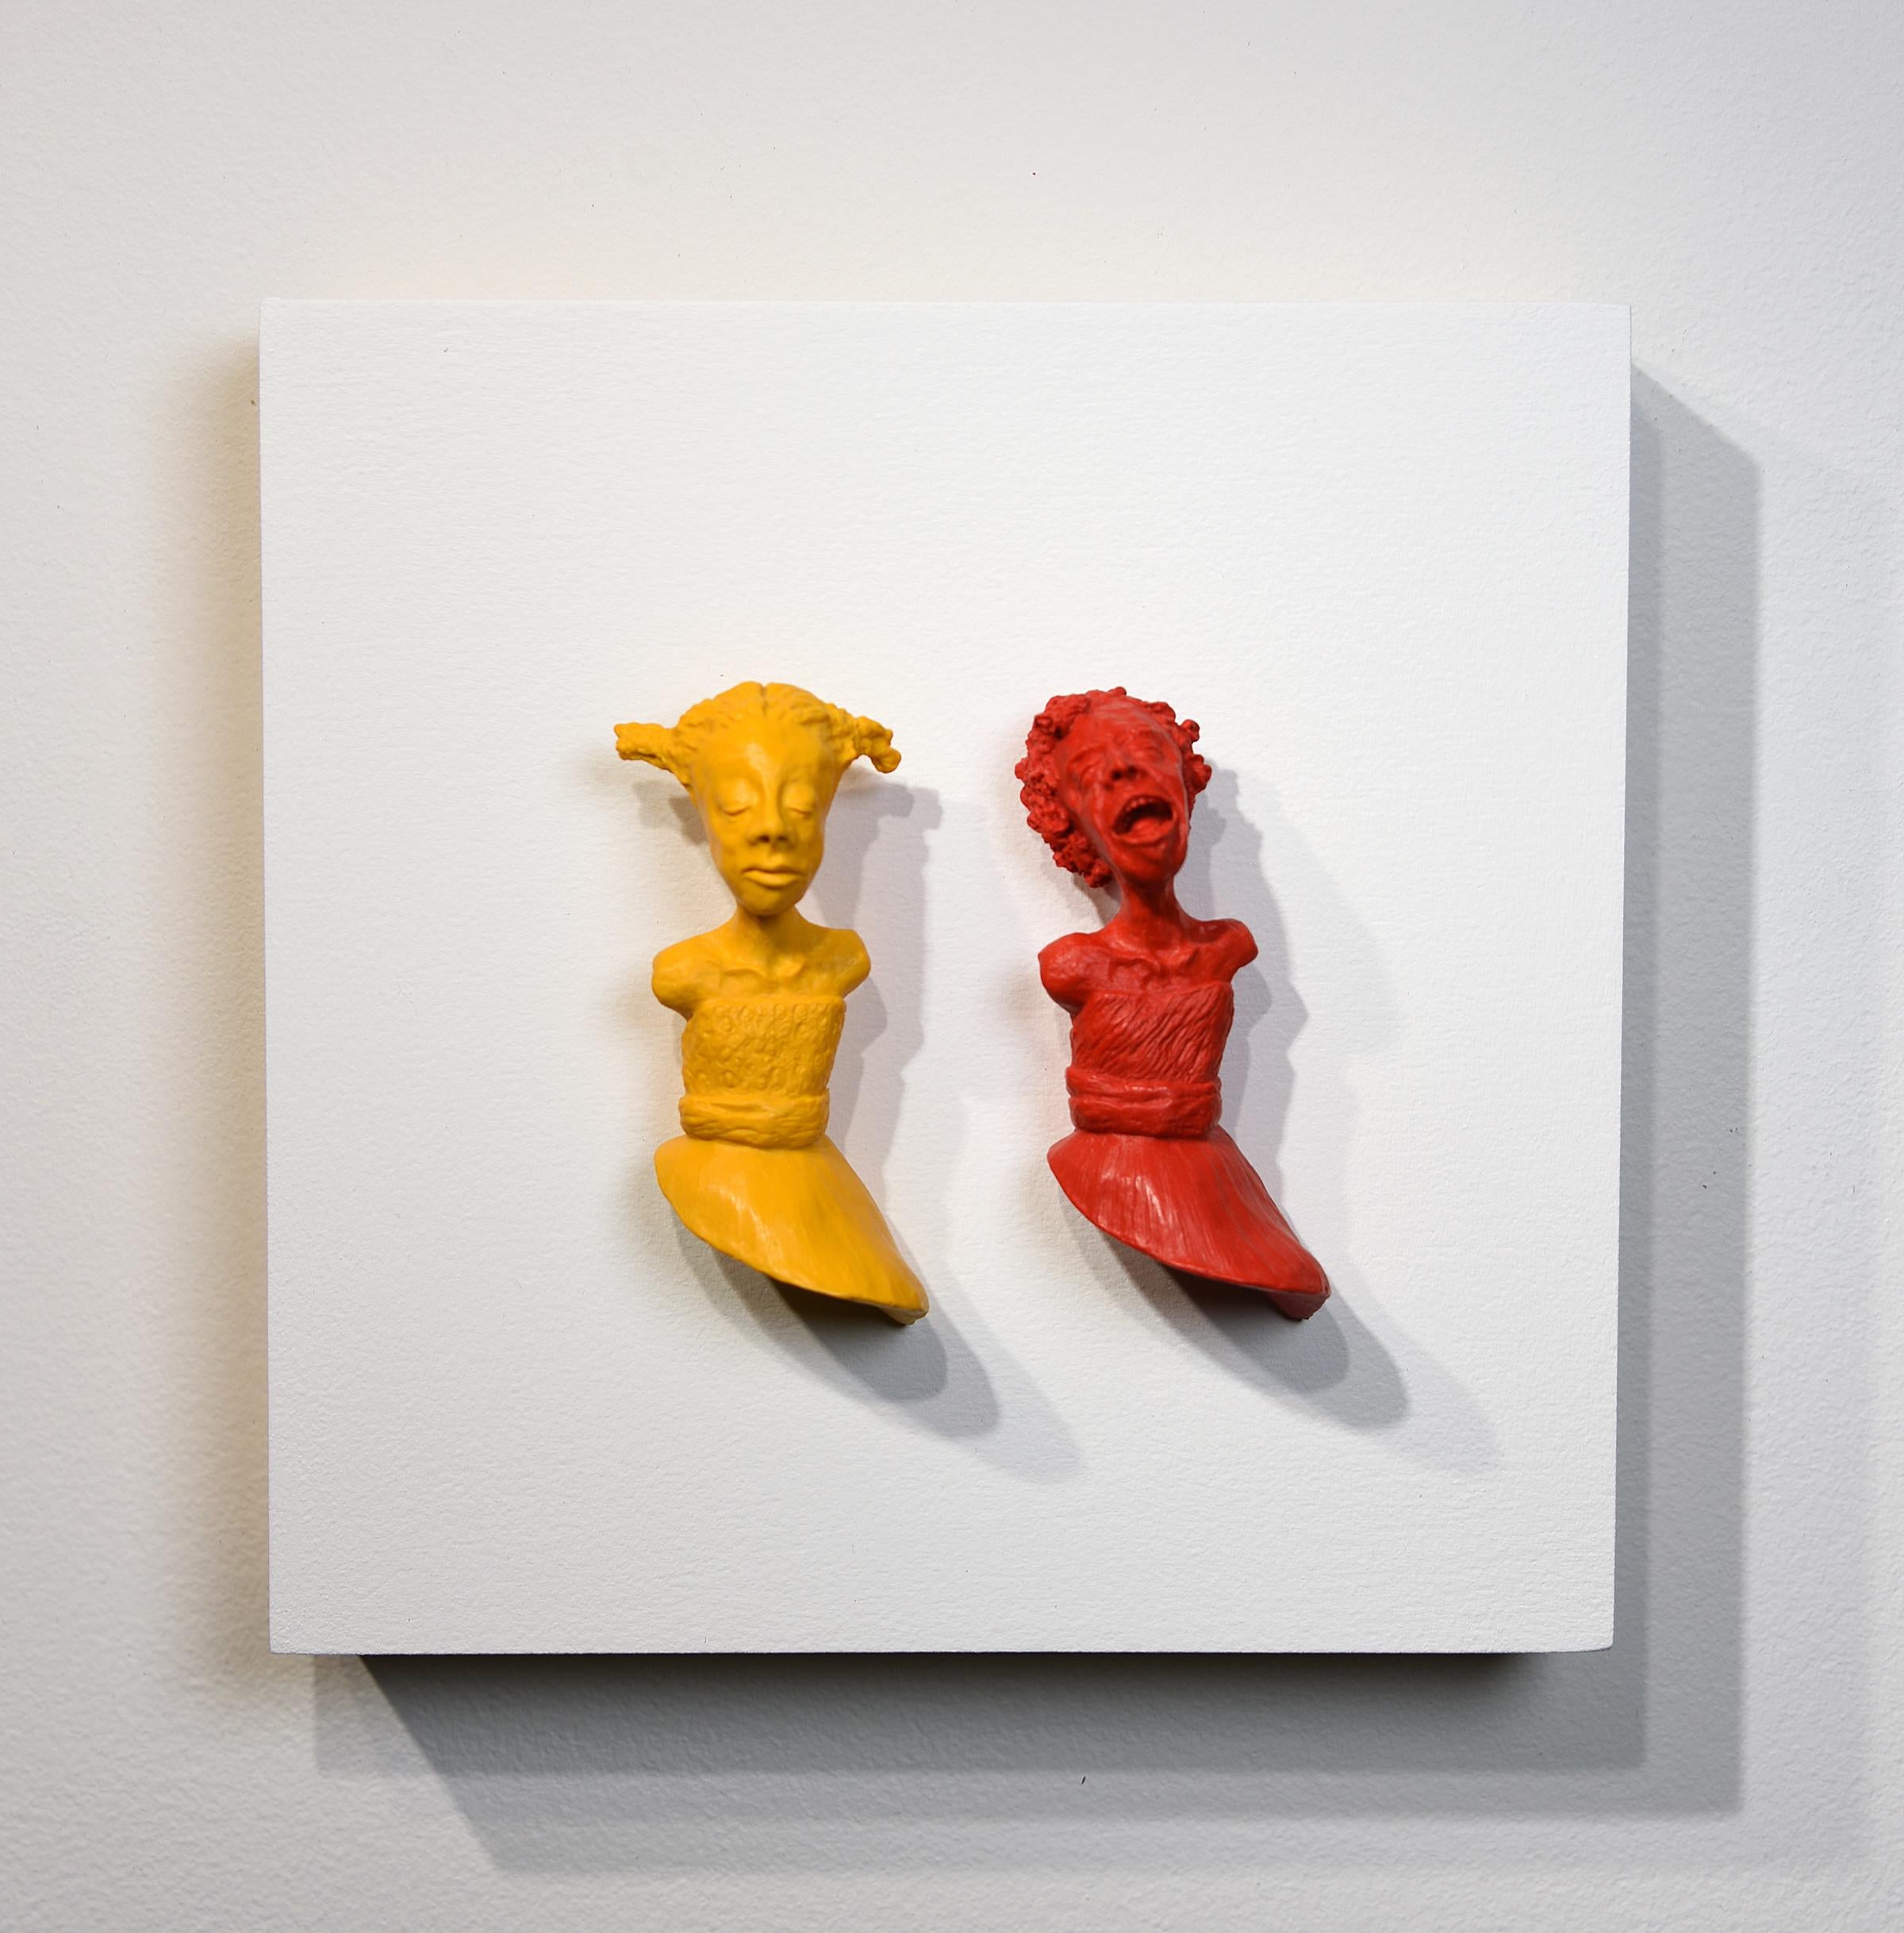 Holly Wilson Figurative Sculpture - "Two Sides of the Self: Yellow and Red"